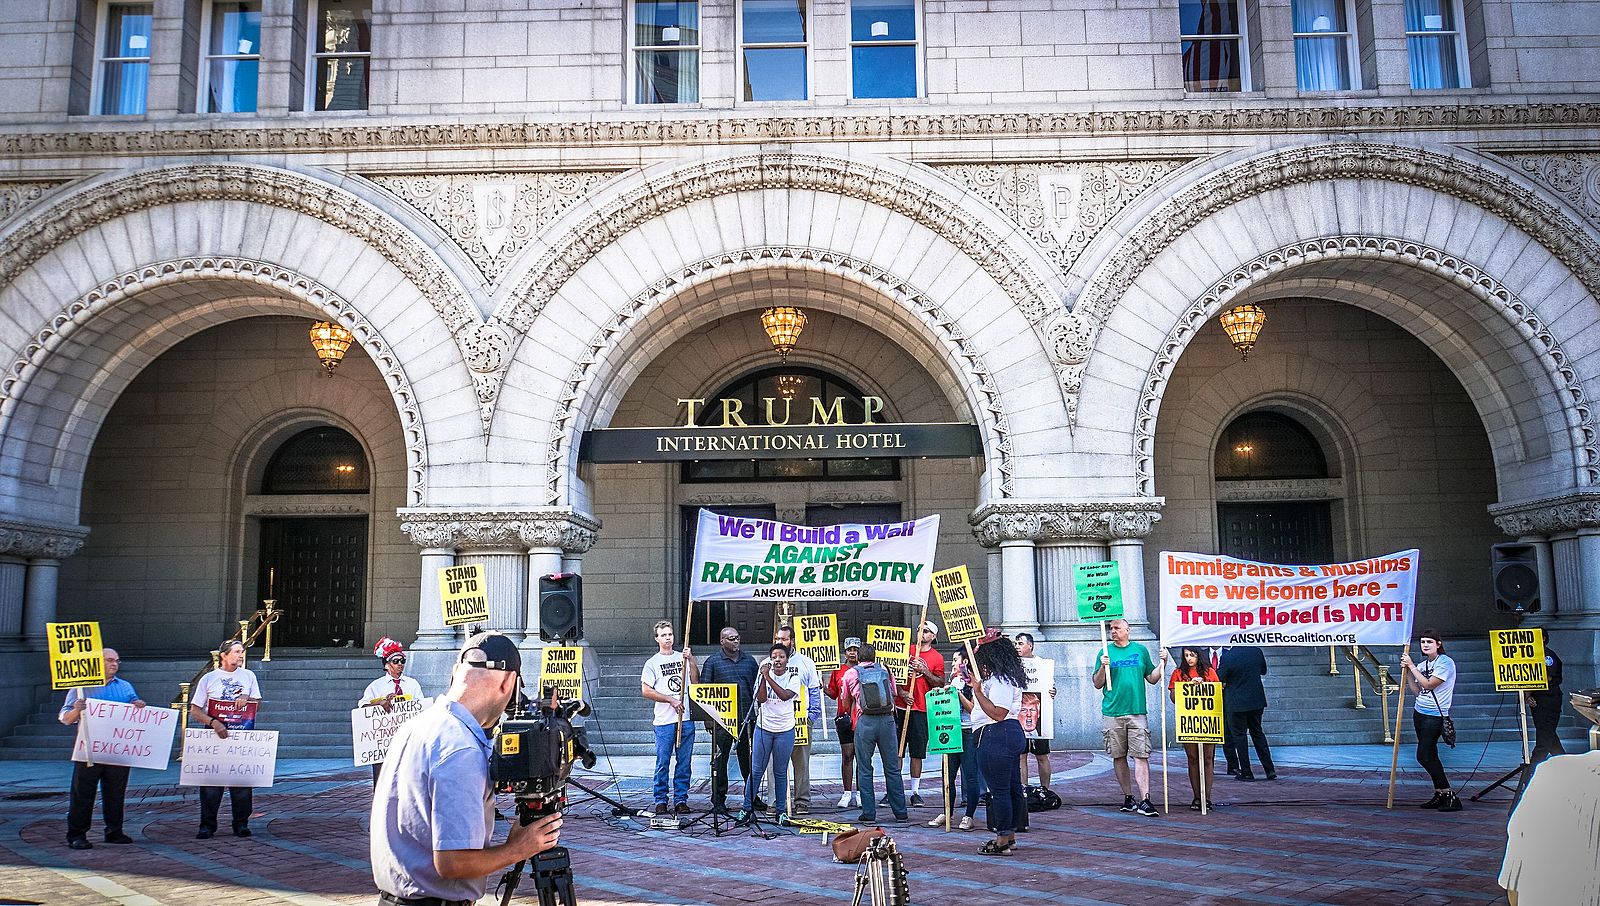 Protesters outside the Trump International Hotel in Washinton, D.C.